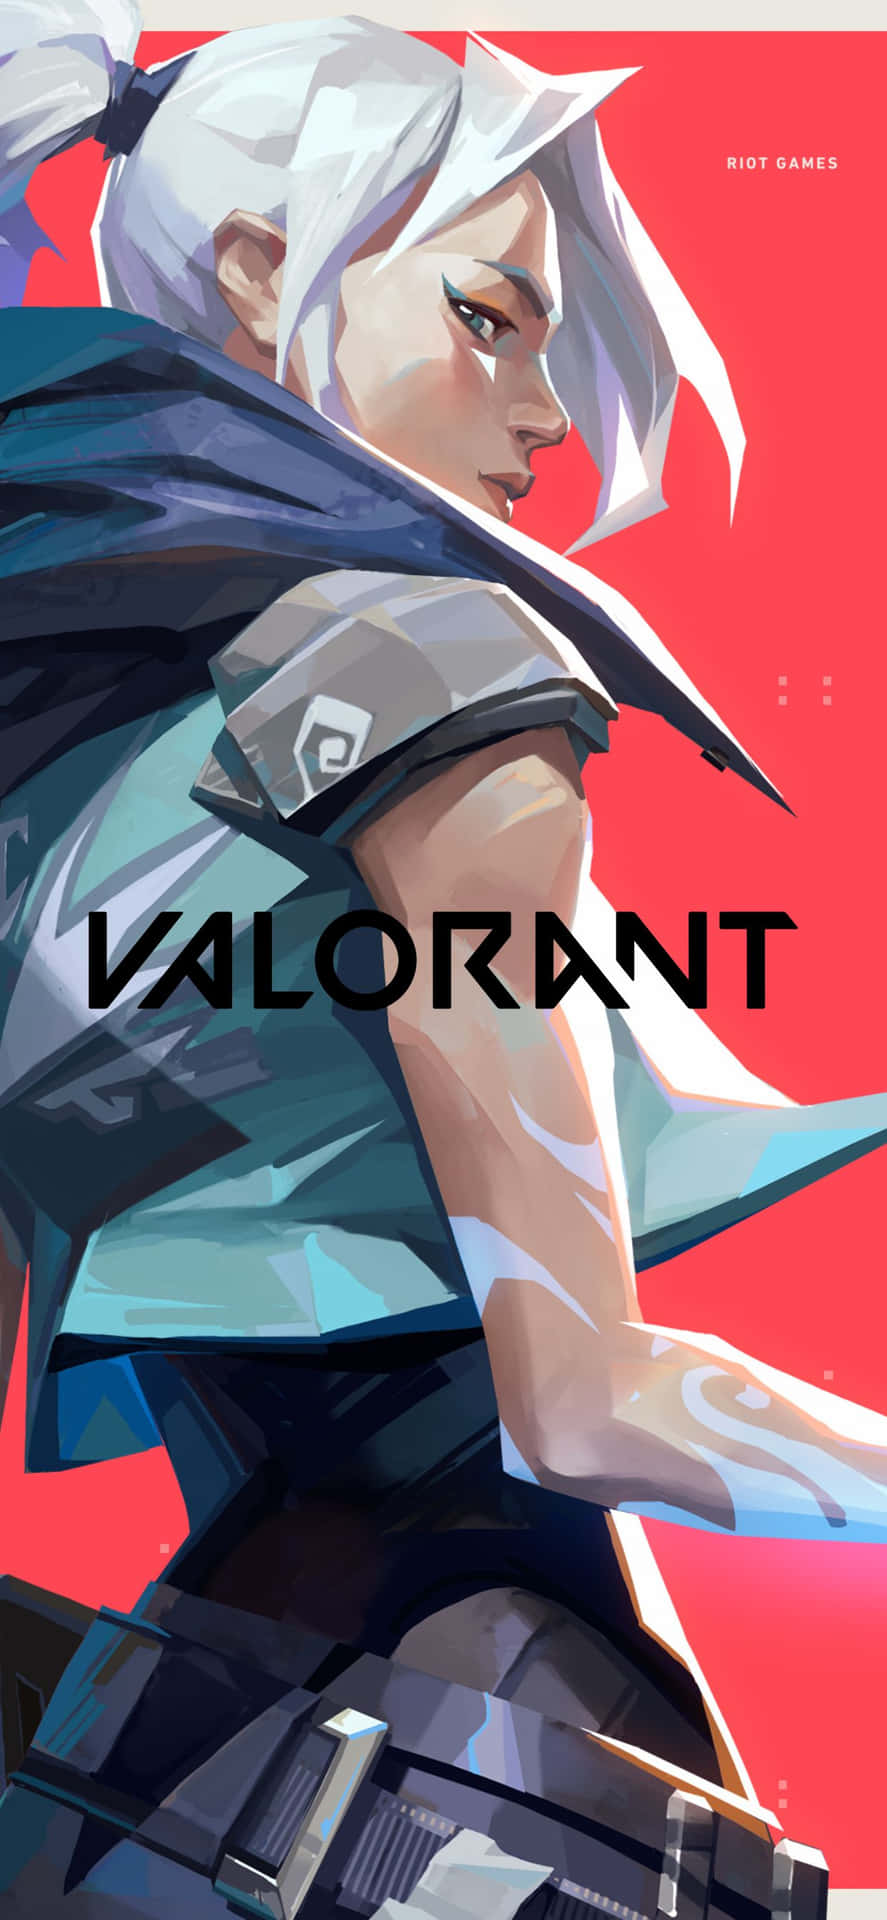 Get Ready to Play Valorant on the Iphone Xs Max